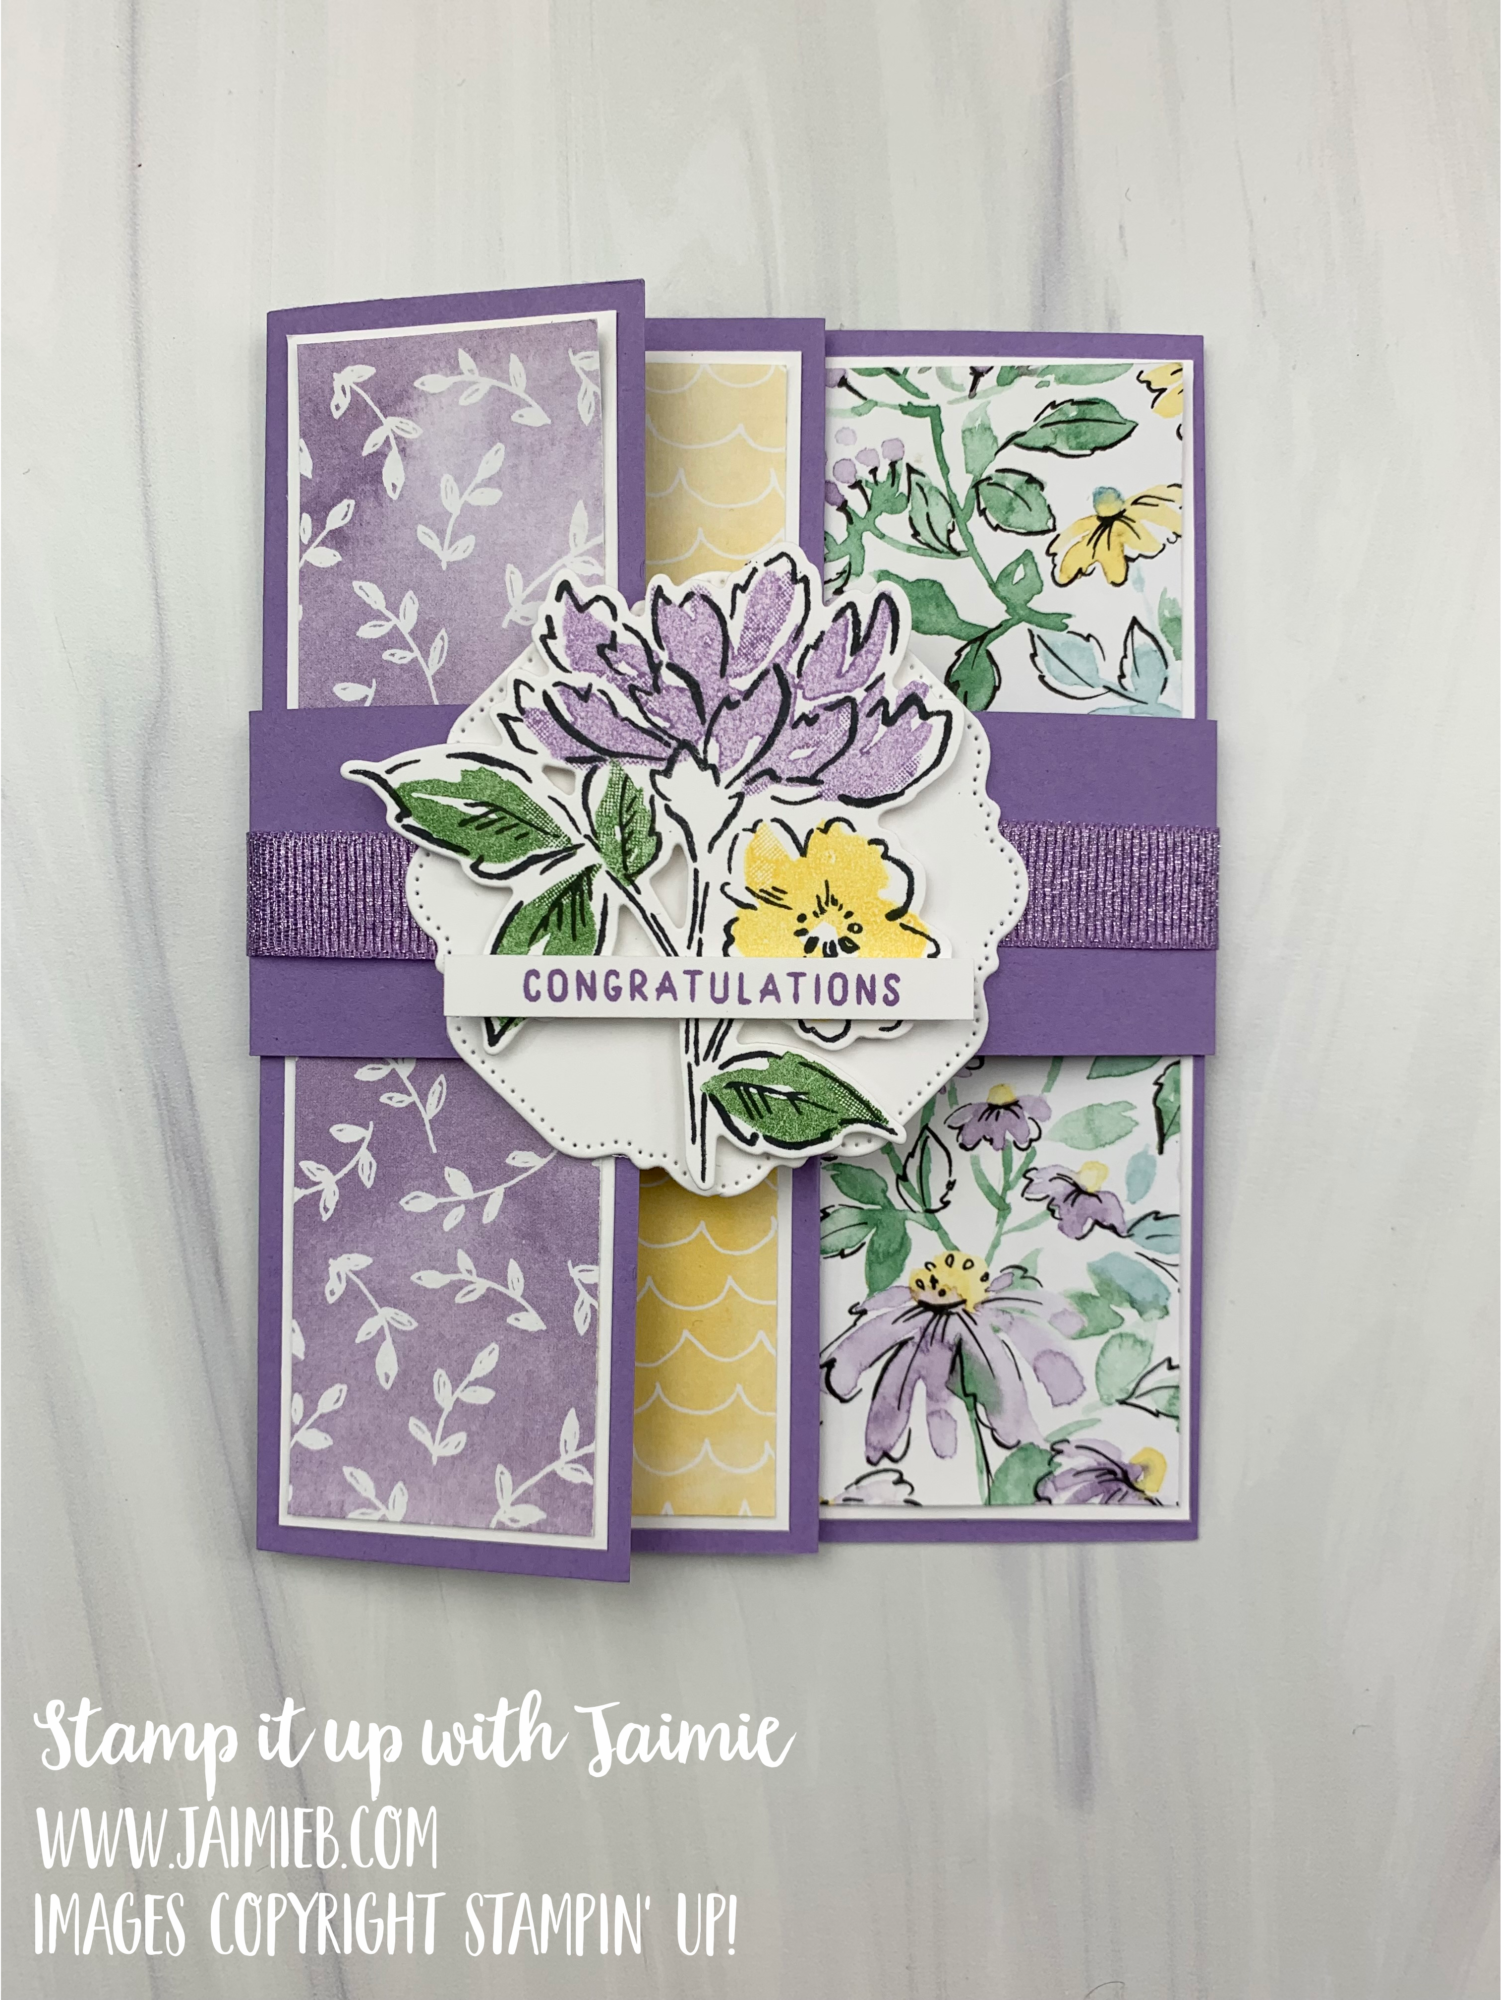 Stampin’ Up! Hand-Penned Petals Book Fold Card